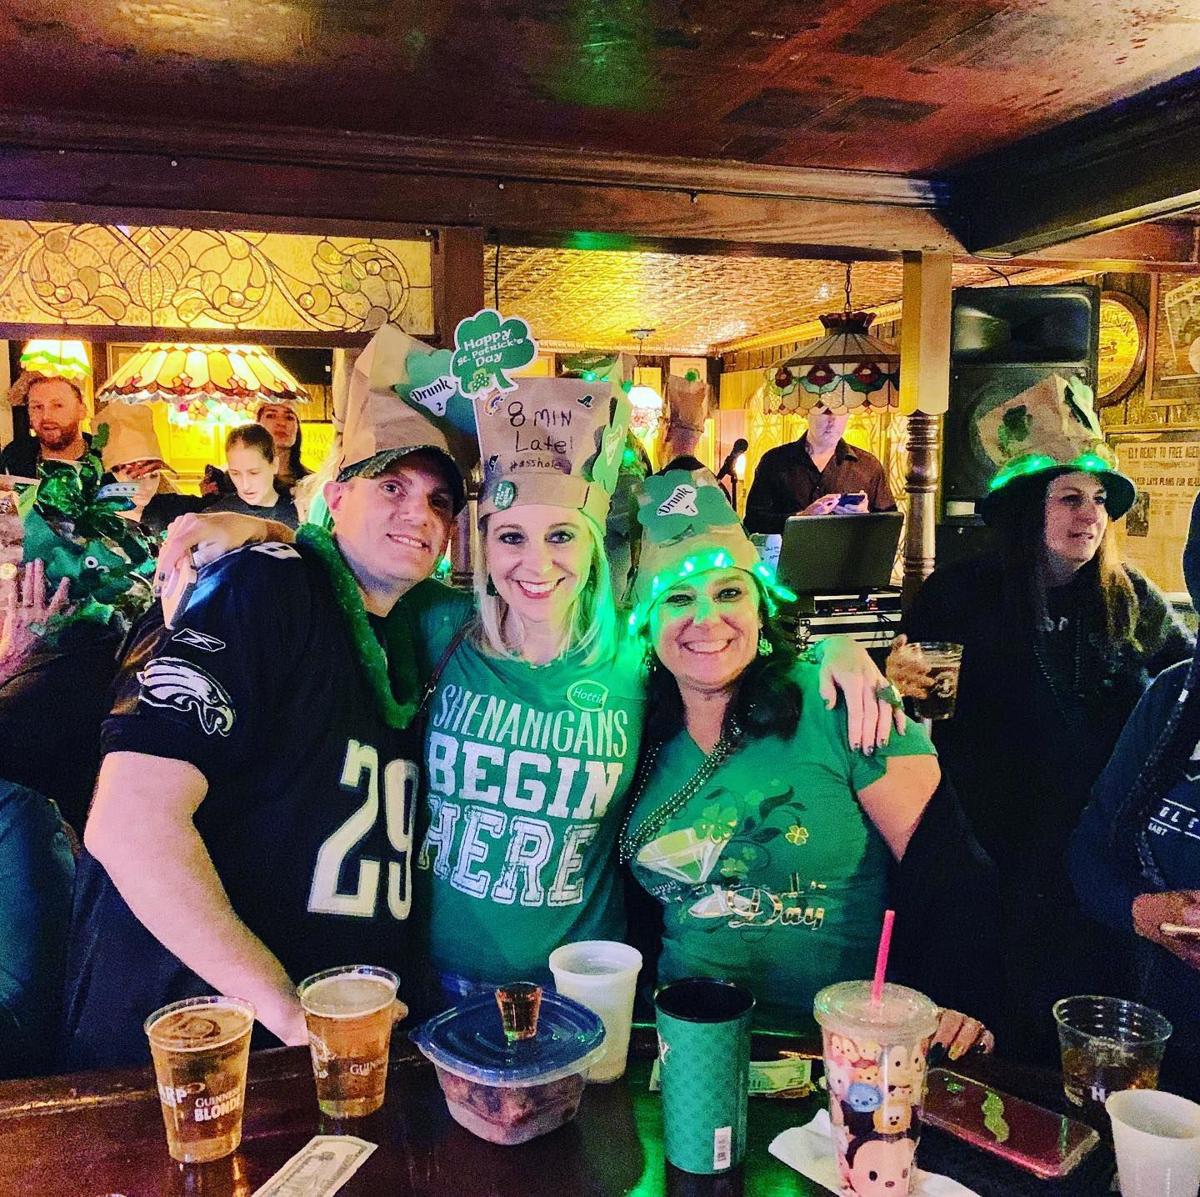 Best Irish pubs in New Jersey for St. Pat's Day